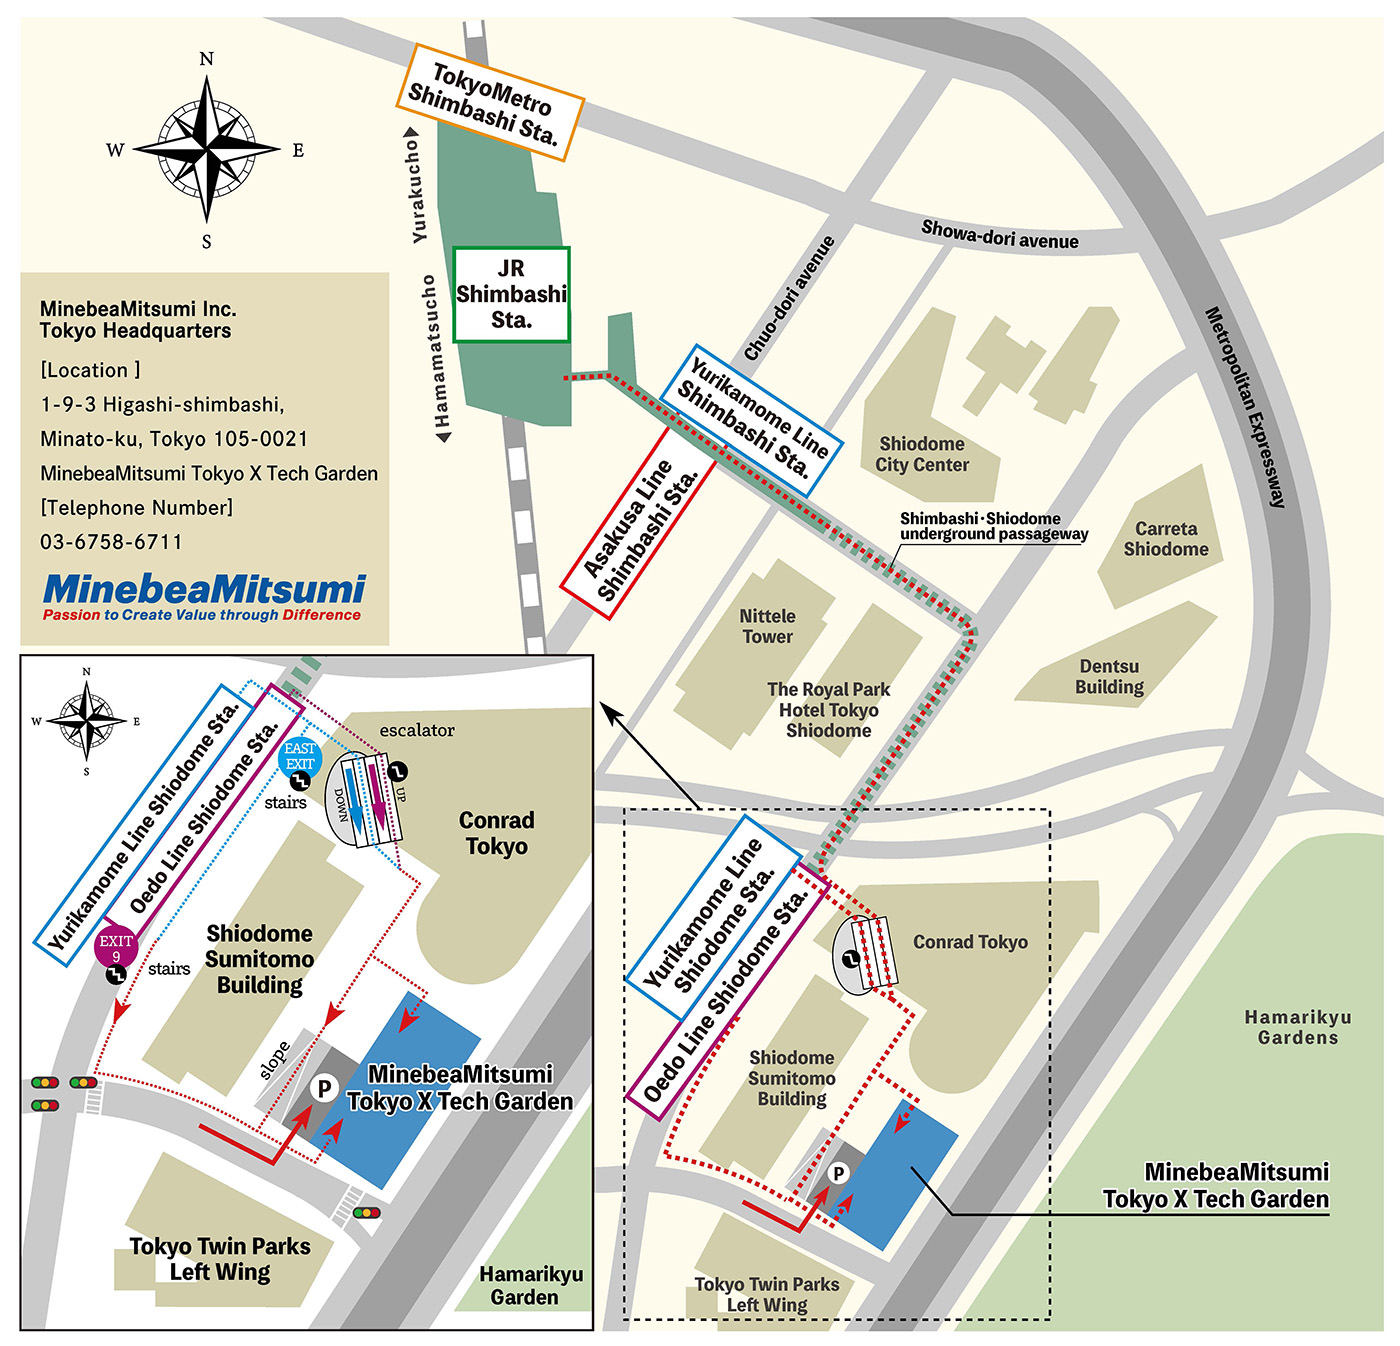 Image : Access Map